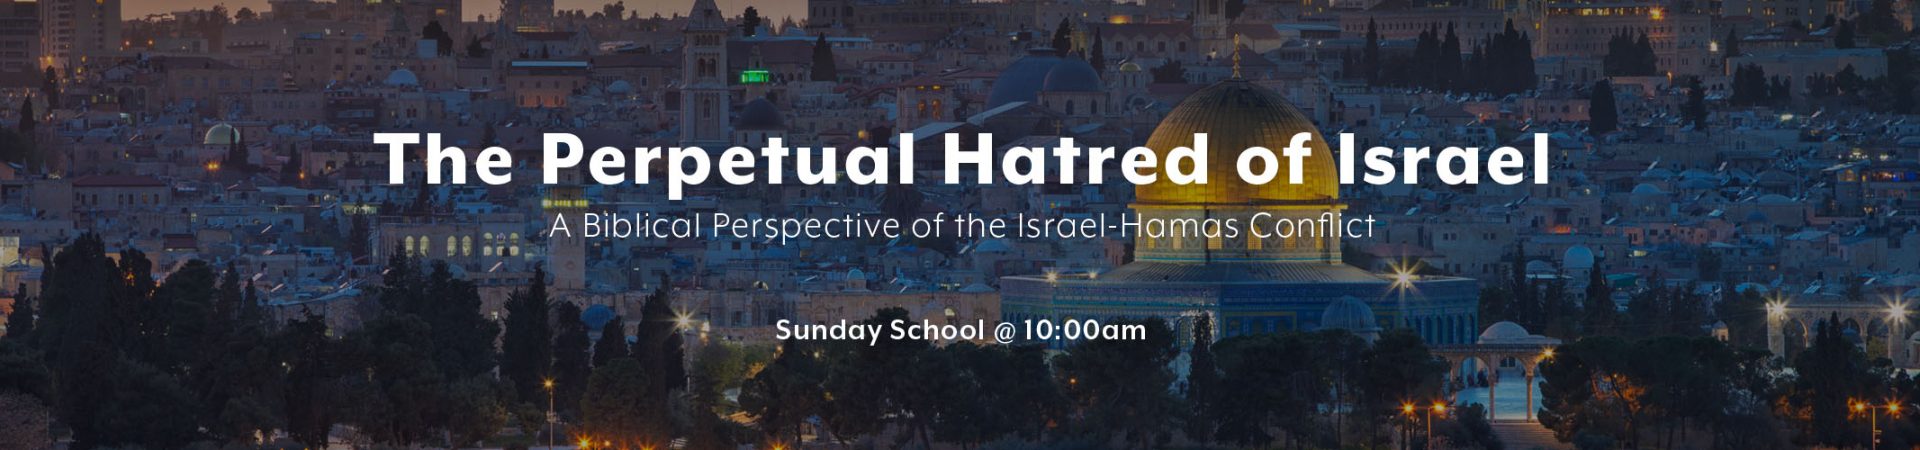 The Perpetual Hatred of Israel: A Biblical Perspective of the Israel-Hamas Conflict